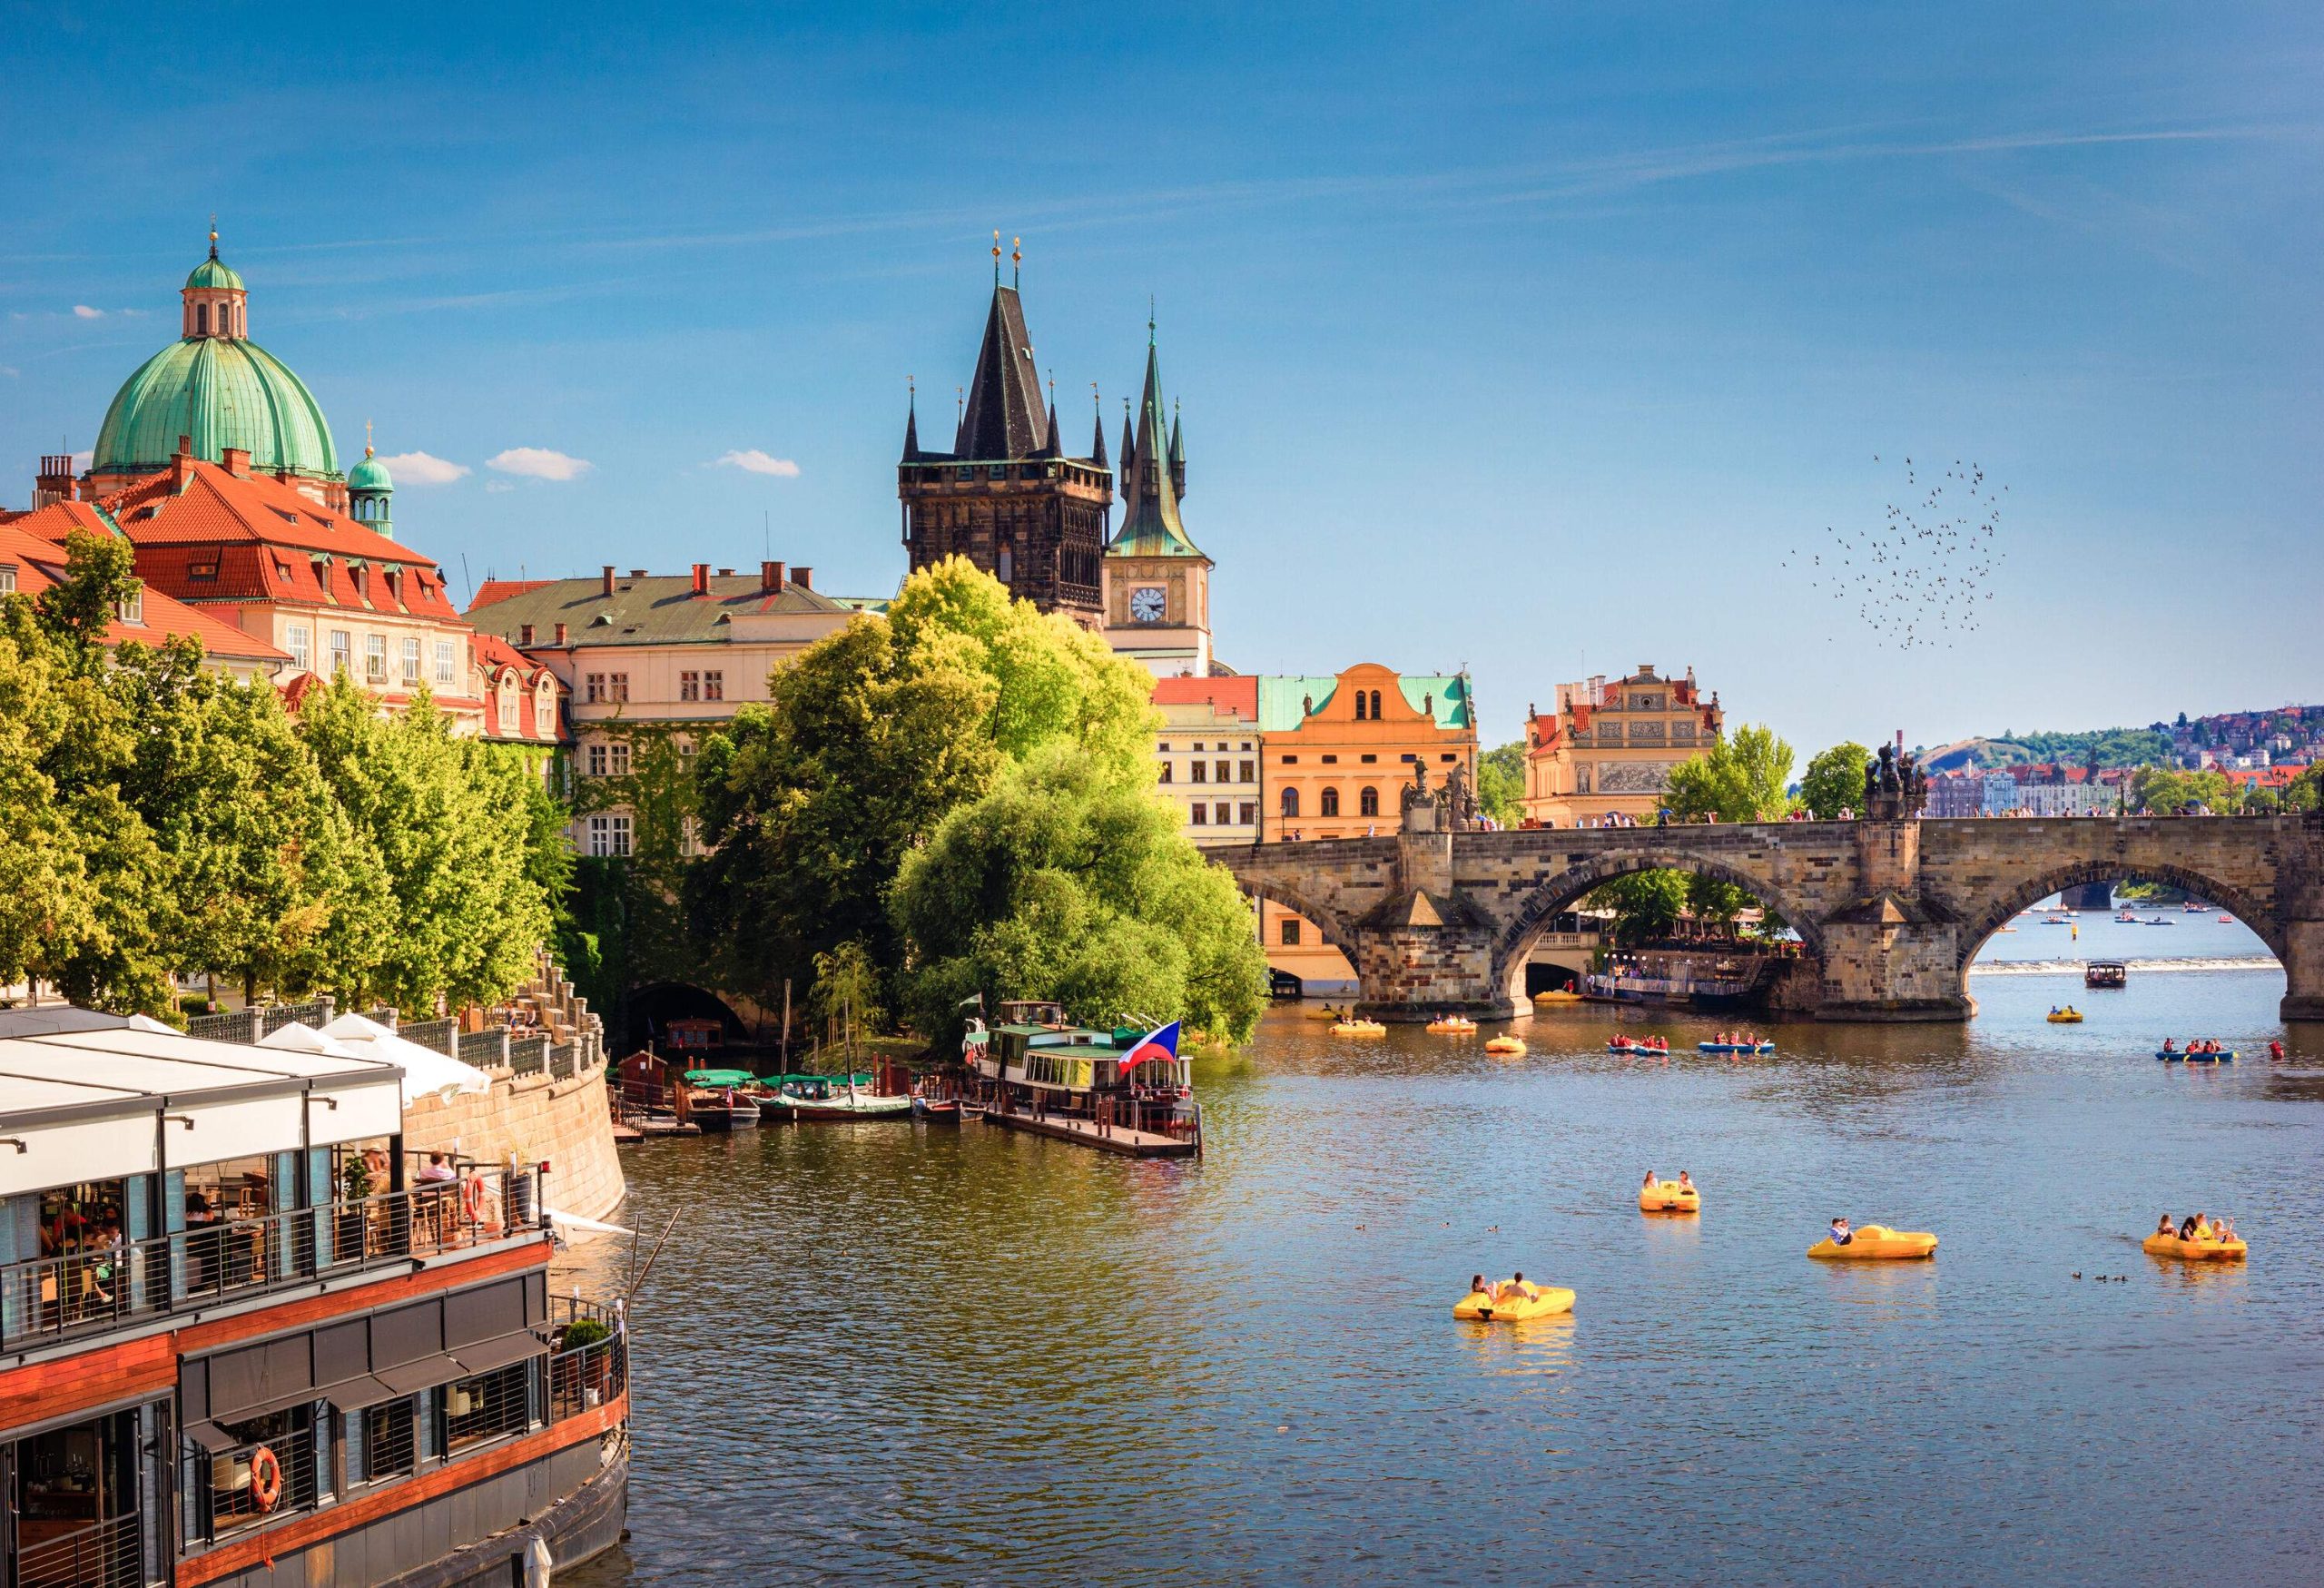 The iconic Charles Bridge extends over a river teeming with people enjoying a day out on yellow paddle boats, with passenger boats moored on the side, all set against the grandeur of Prague Castle looming in the background.